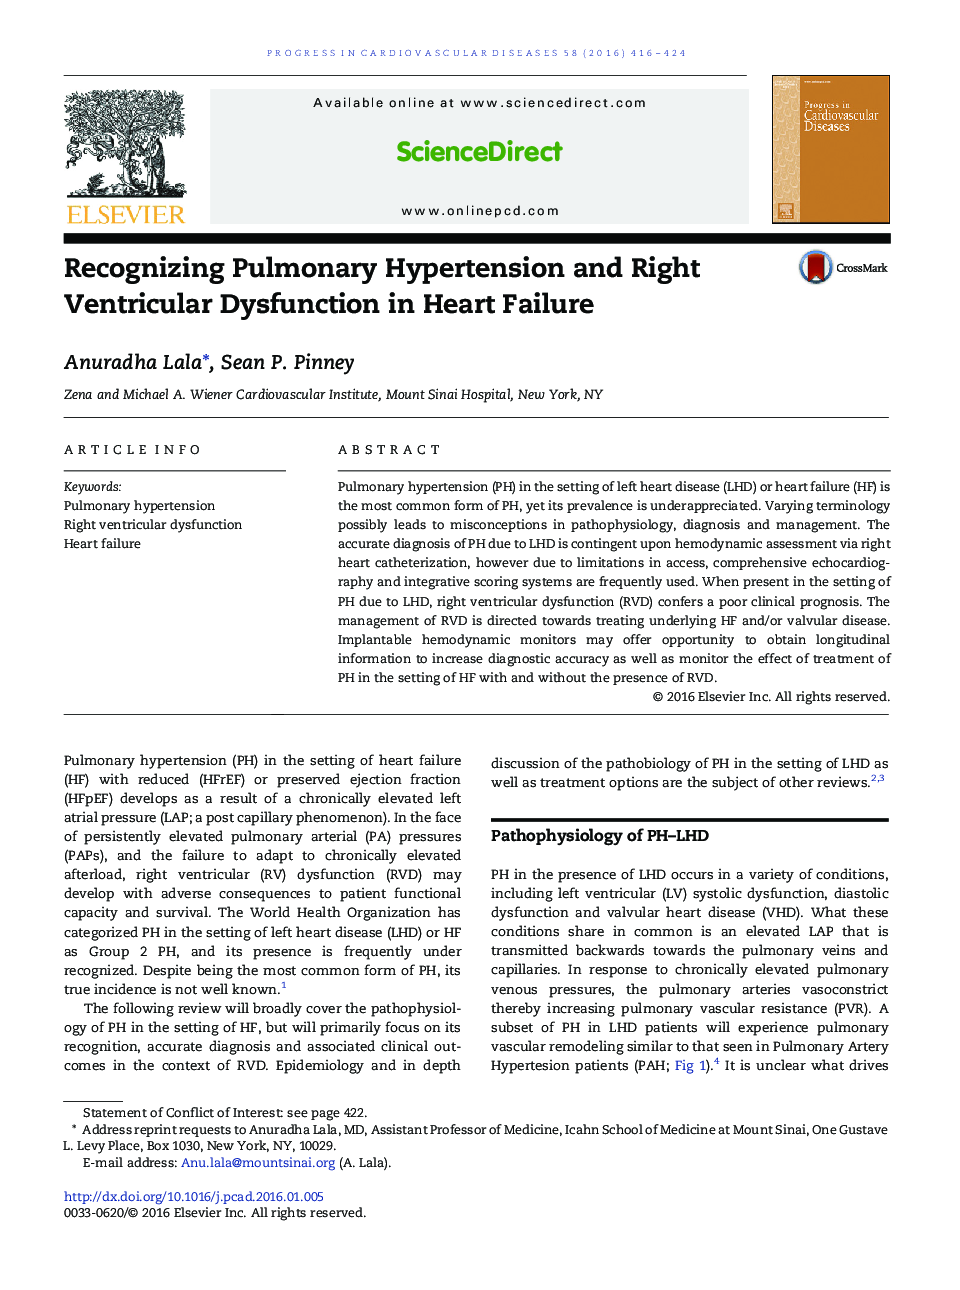 Recognizing Pulmonary Hypertension and Right Ventricular Dysfunction in Heart Failure 